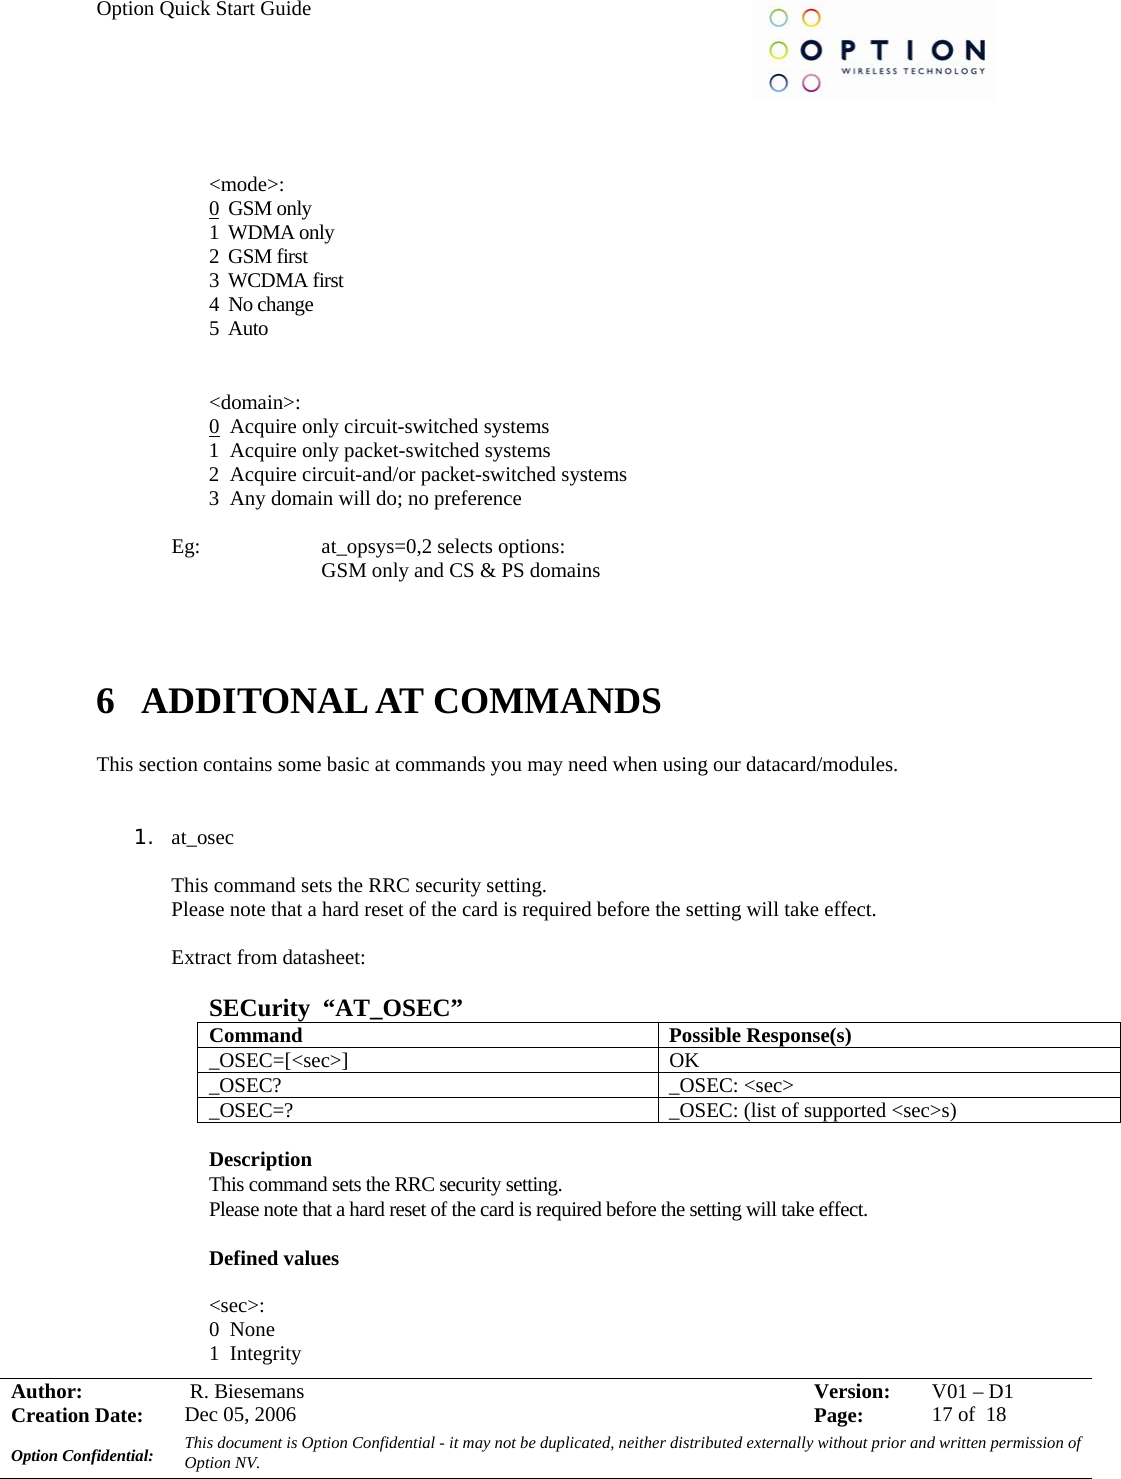 Option Quick Start Guide     Author:   R. Biesemans  Version:  V01 –D1Creation Date:  Dec 05, 2006    Page:  17 of  18 Option Confidential:  This document is Option Confidential - it may not be duplicated, neither distributed externally without prior and written permission of Option NV.     &lt;mode&gt;:  0  GSM only 1  WDMA only 2  GSM first 3  WCDMA first 4  No change 5  Auto  &lt;domain&gt;:  0  Acquire only circuit-switched systems 1  Acquire only packet-switched systems 2  Acquire circuit-and/or packet-switched systems 3  Any domain will do; no preference  Eg:     at_opsys=0,2 selects options: GSM only and CS &amp; PS domains    6 ADDITONAL AT COMMANDS  This section contains some basic at commands you may need when using our datacard/modules.   1. at_osec  This command sets the RRC security setting. Please note that a hard reset of the card is required before the setting will take effect.  Extract from datasheet:  SECurity  “AT_OSEC” Command Possible Response(s) _OSEC=[&lt;sec&gt;] OK _OSEC? _OSEC: &lt;sec&gt; _OSEC=?  _OSEC: (list of supported &lt;sec&gt;s)  Description  This command sets the RRC security setting. Please note that a hard reset of the card is required before the setting will take effect. Defined values  &lt;sec&gt;: 0  None 1  Integrity 